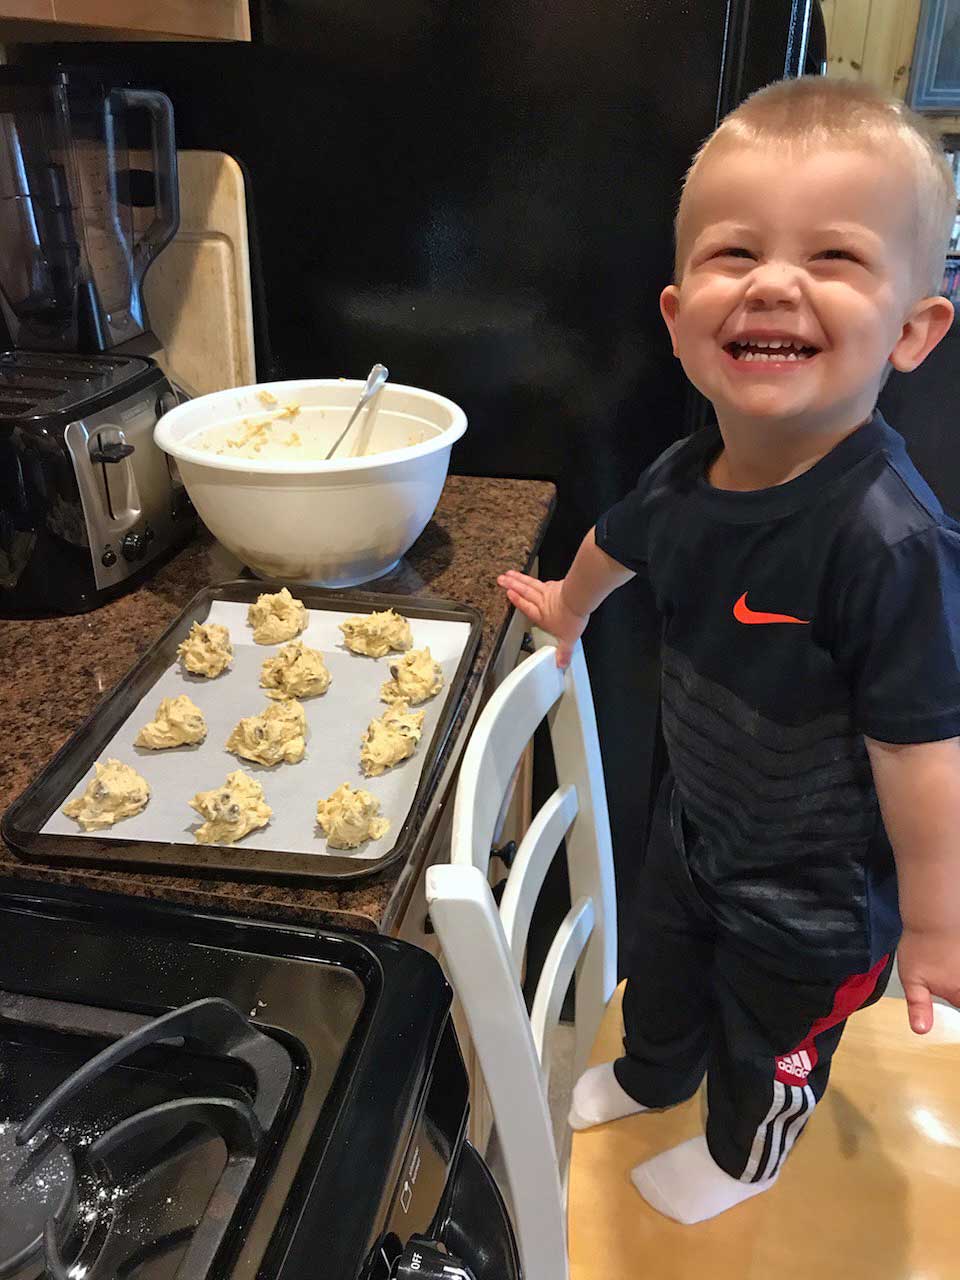 A small baker standing on a stool over a bowl of cookie dough and smiling